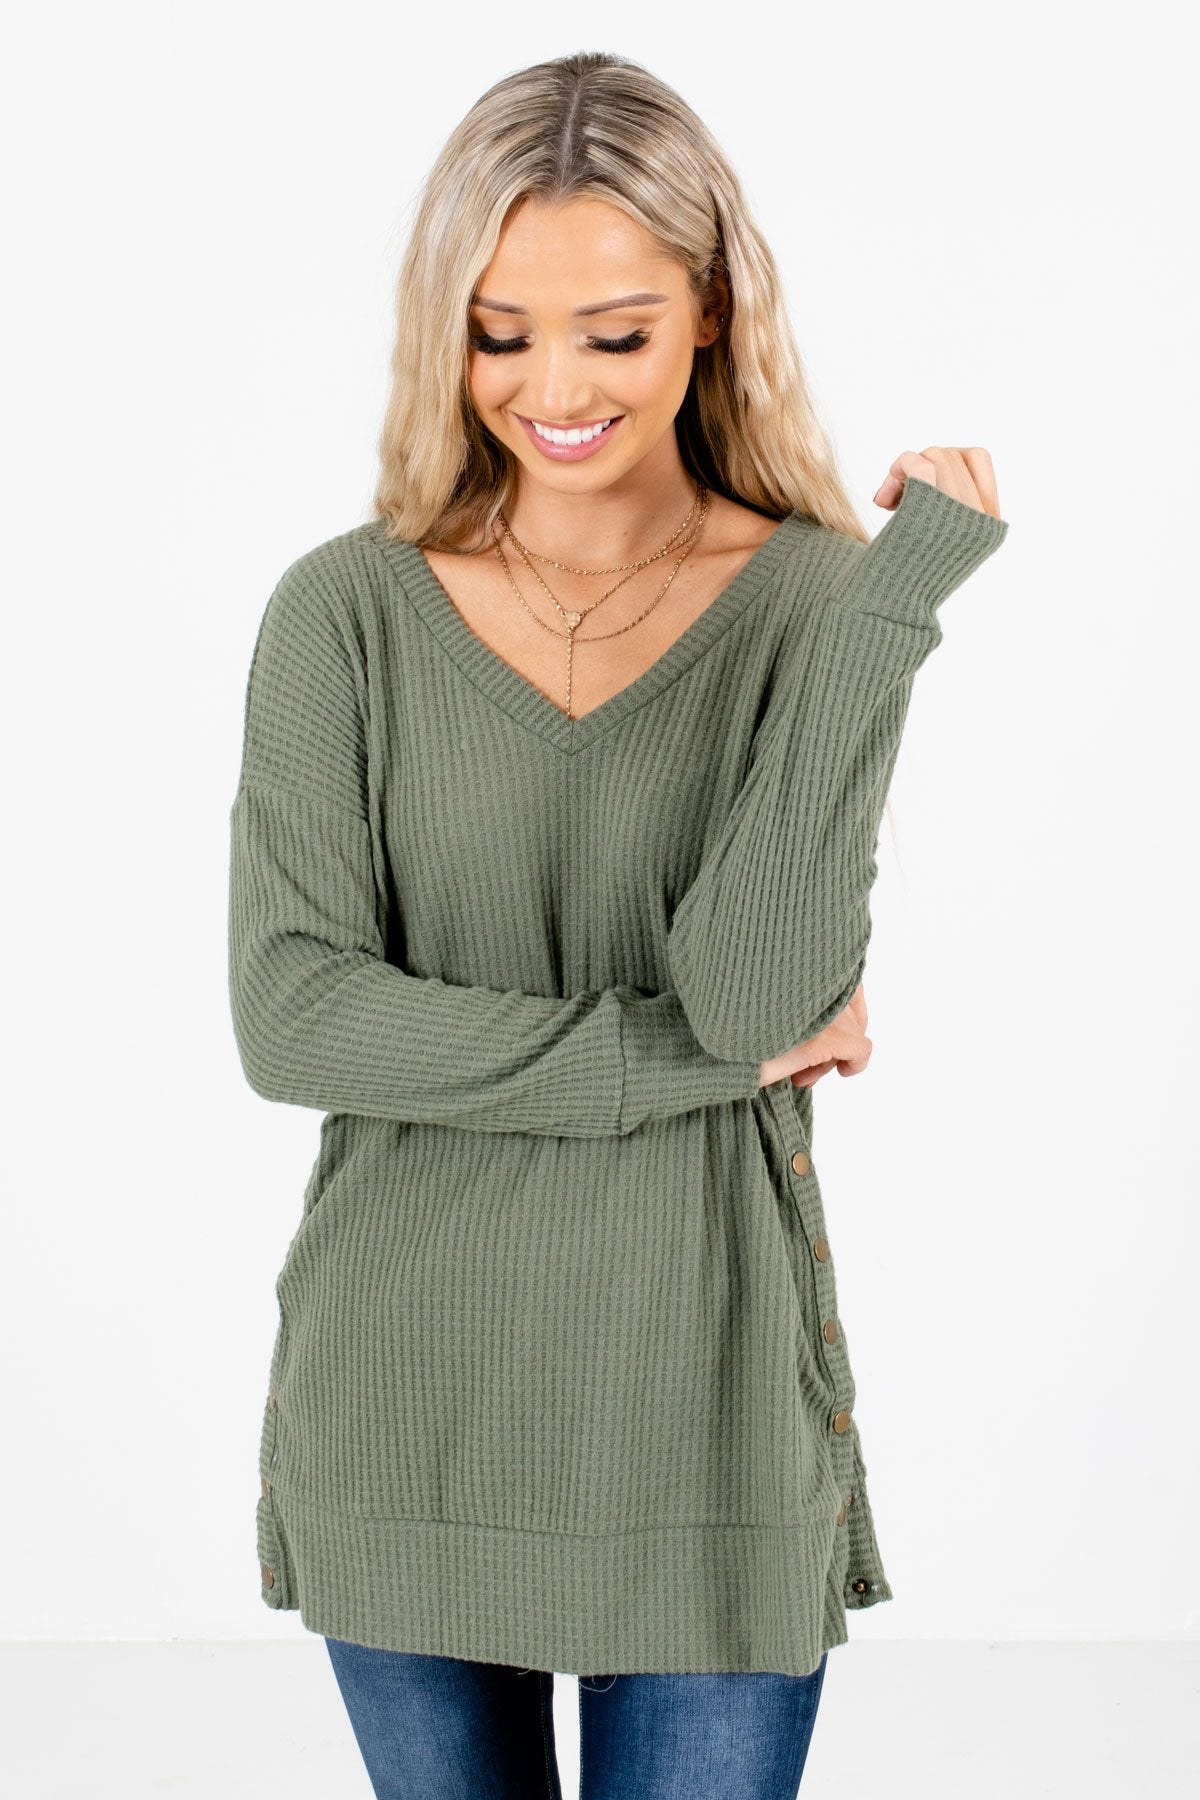 Women’s Olive Green Warm and Cozy Boutique Clothing